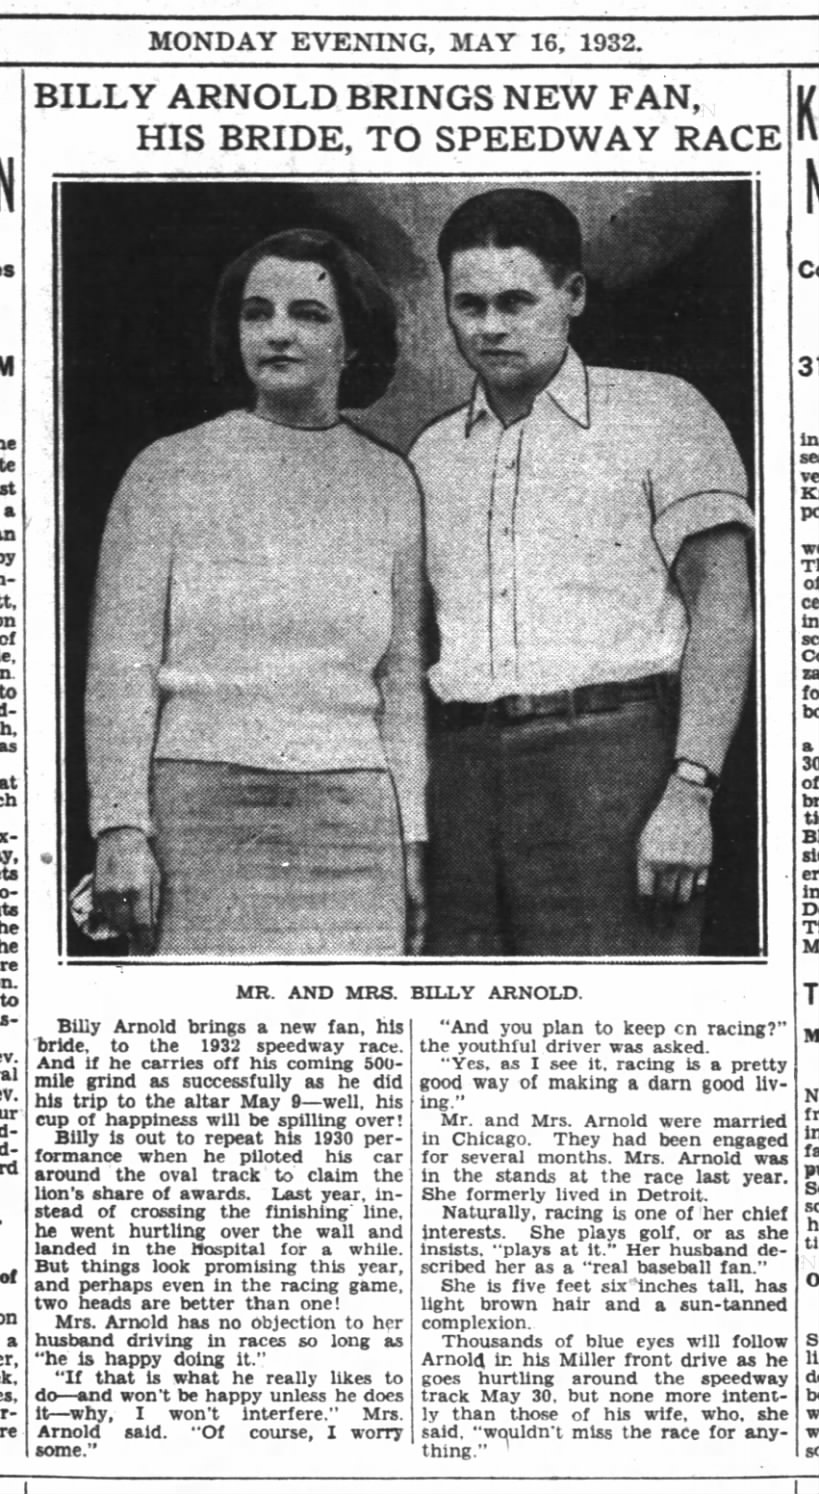 1932 Indianapolis 500 practice May 16 1932 Billy Arnold wedding announcement